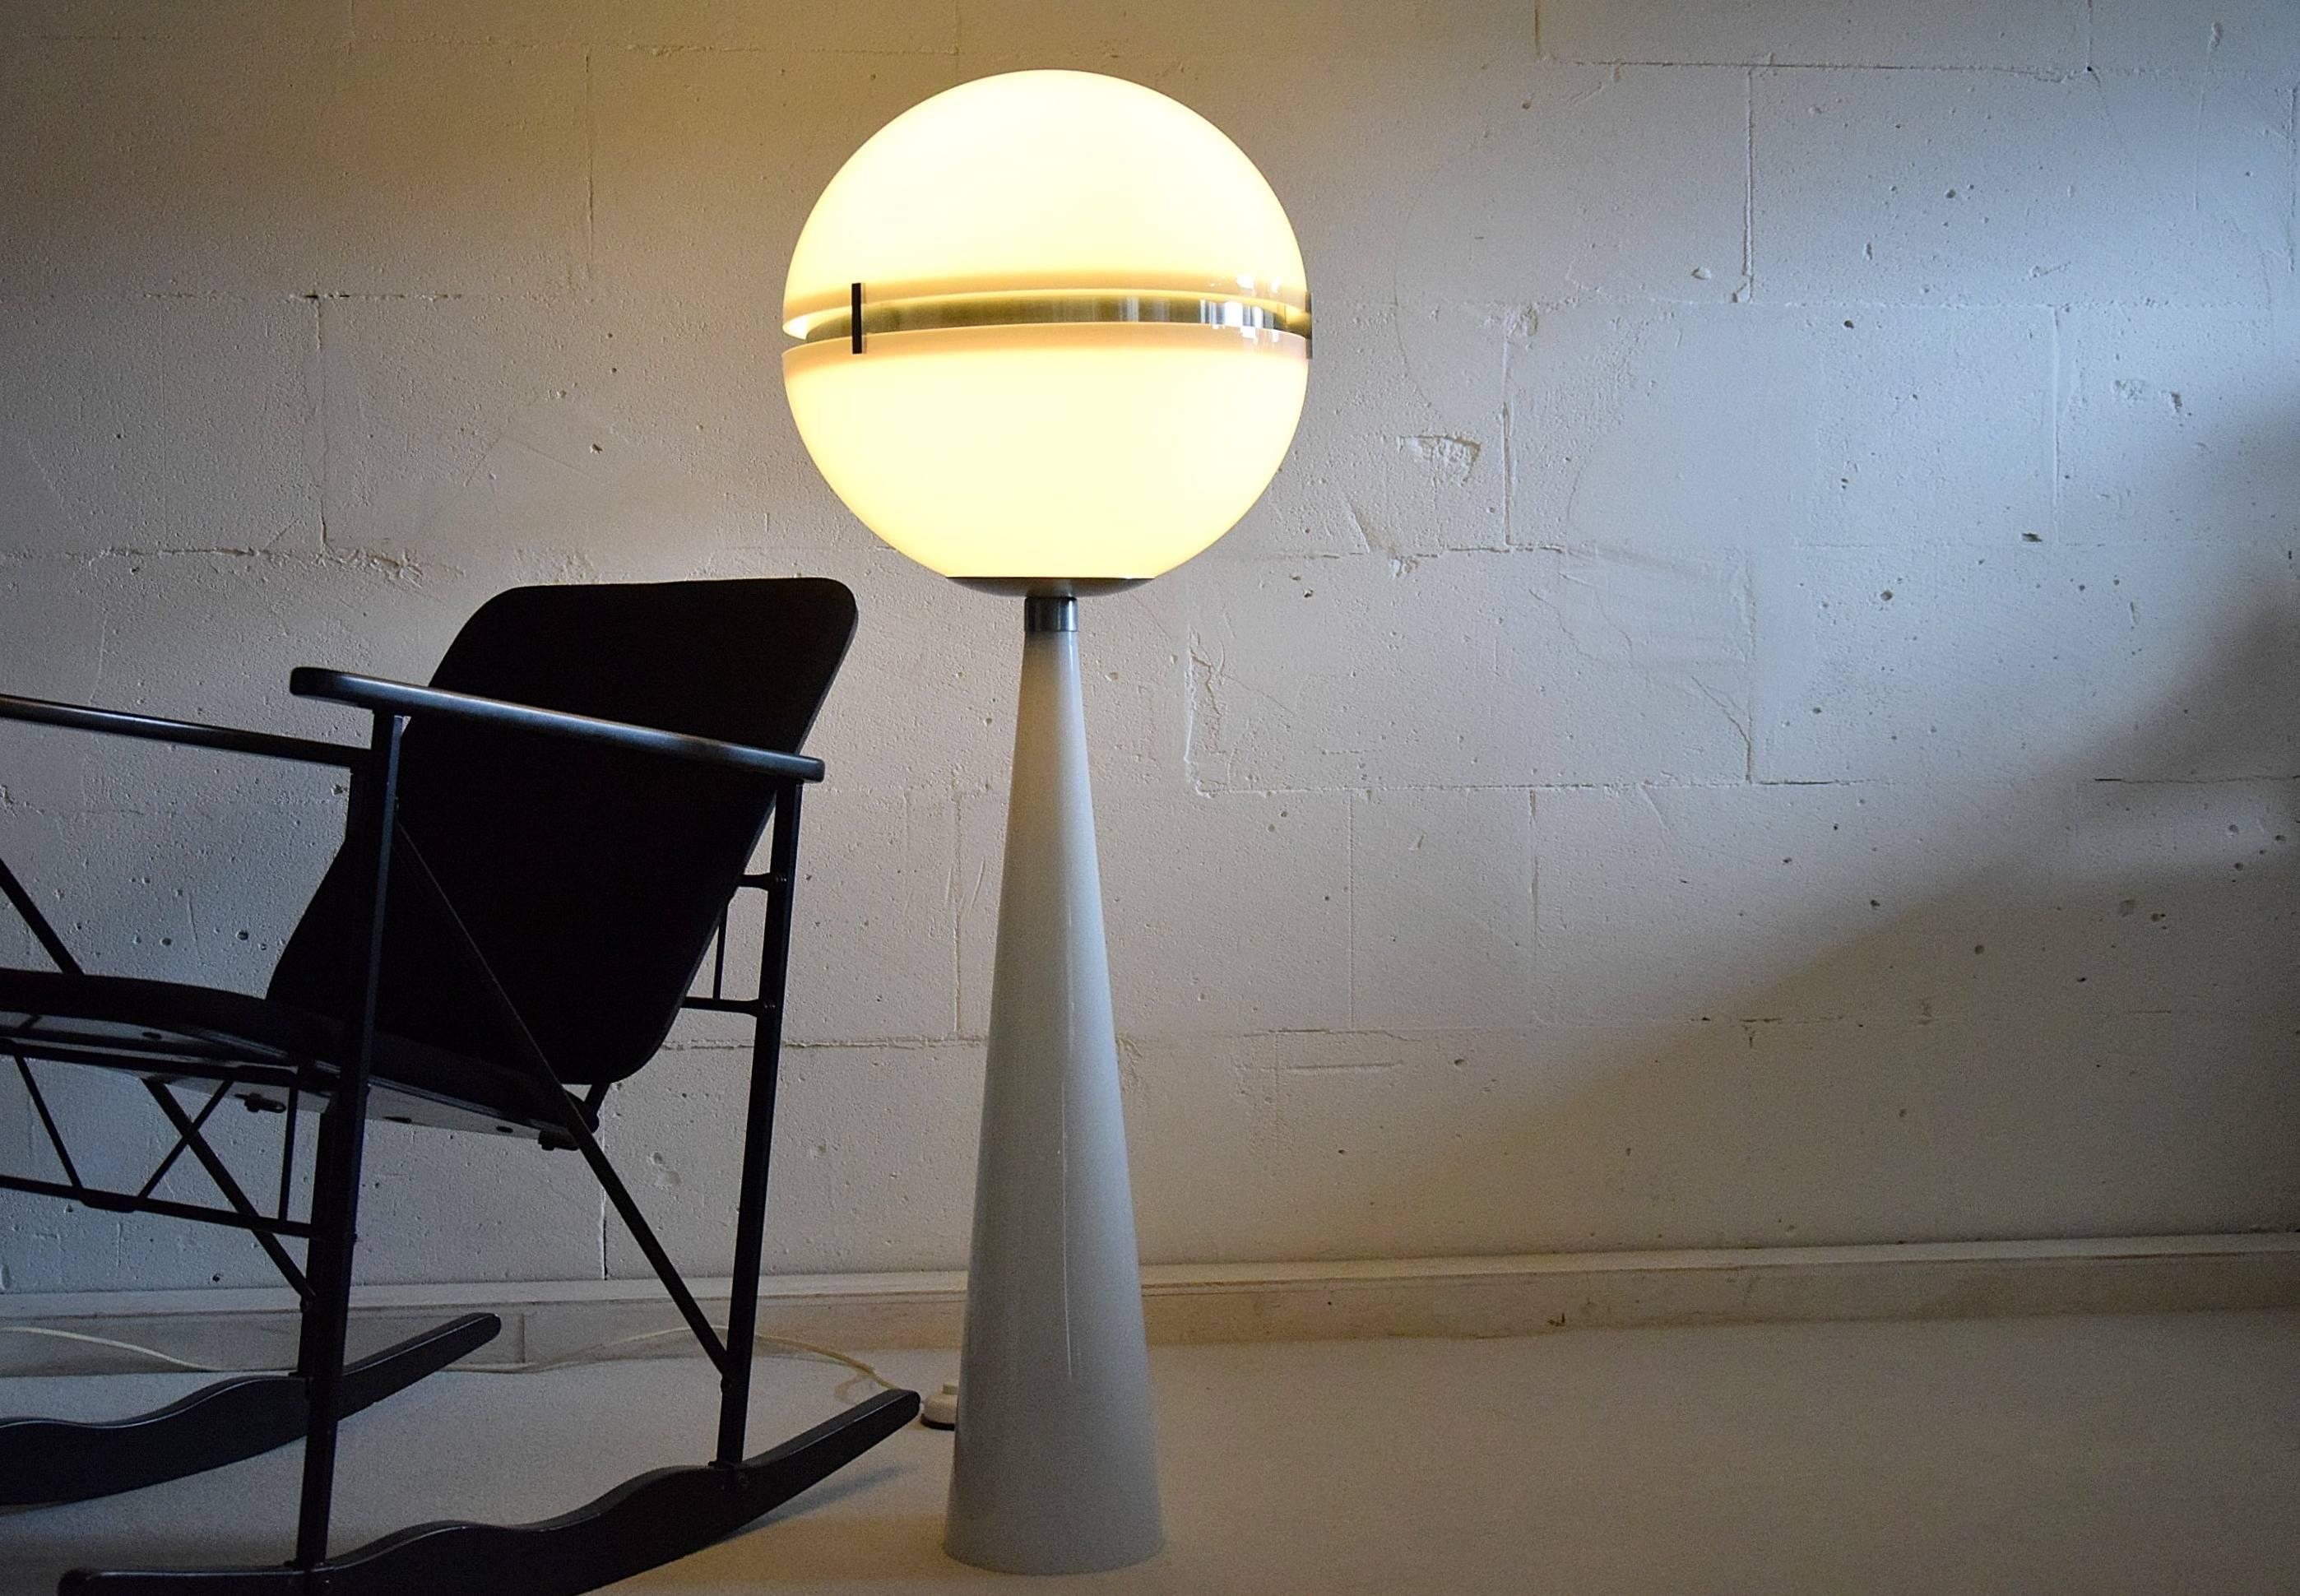 Italian space age floor lamp which seems to be taken out Stanley Kubrick's 2001: A Space Odyssey.
A beautiful eye catcher in great condition. A jewel in any room.

Measurements: H 115 x D 40 cm.

The lamp will be shipped abroad in a custom-made